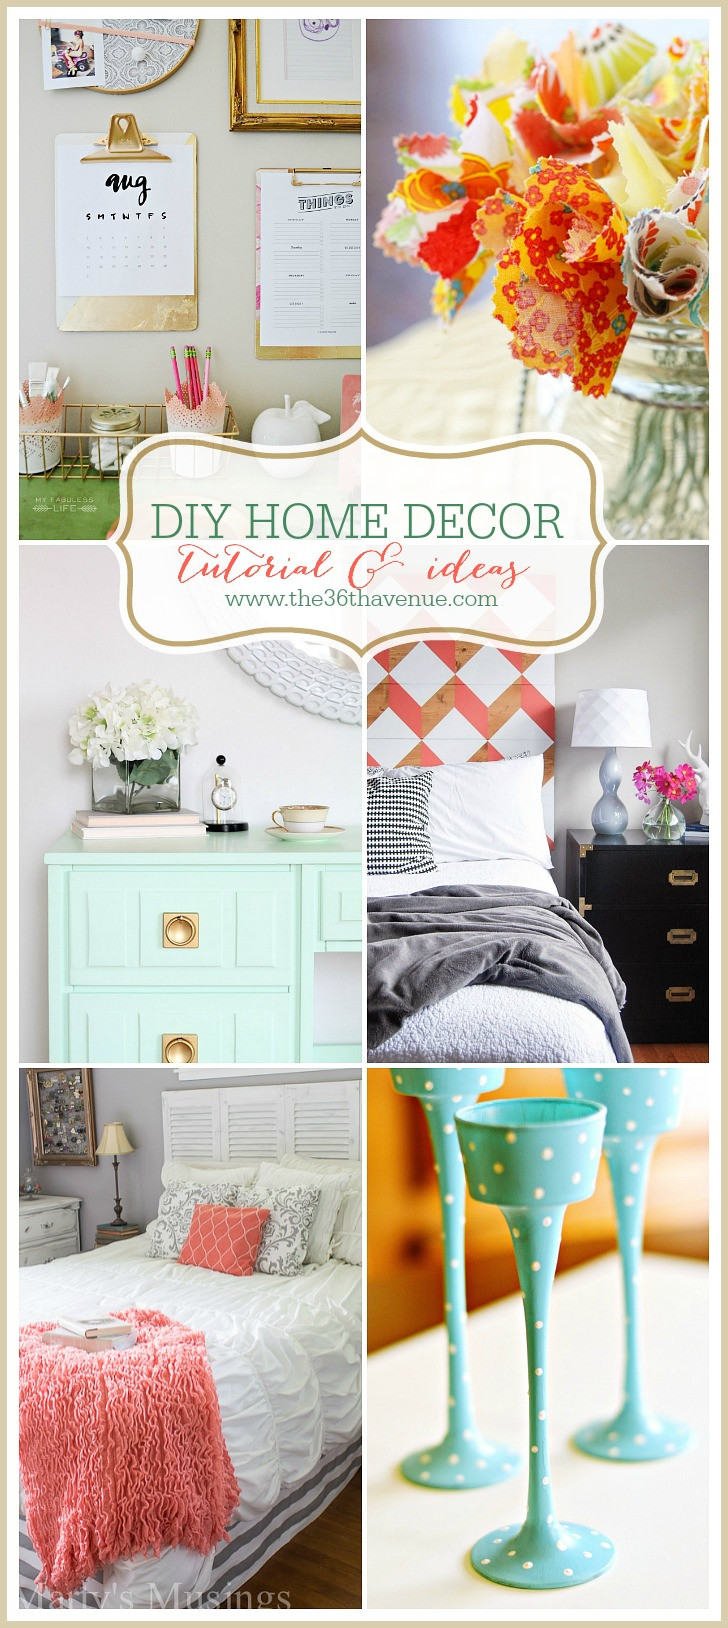 DIY Home Craft
 The 36th AVENUE Home Decor DIY Projects